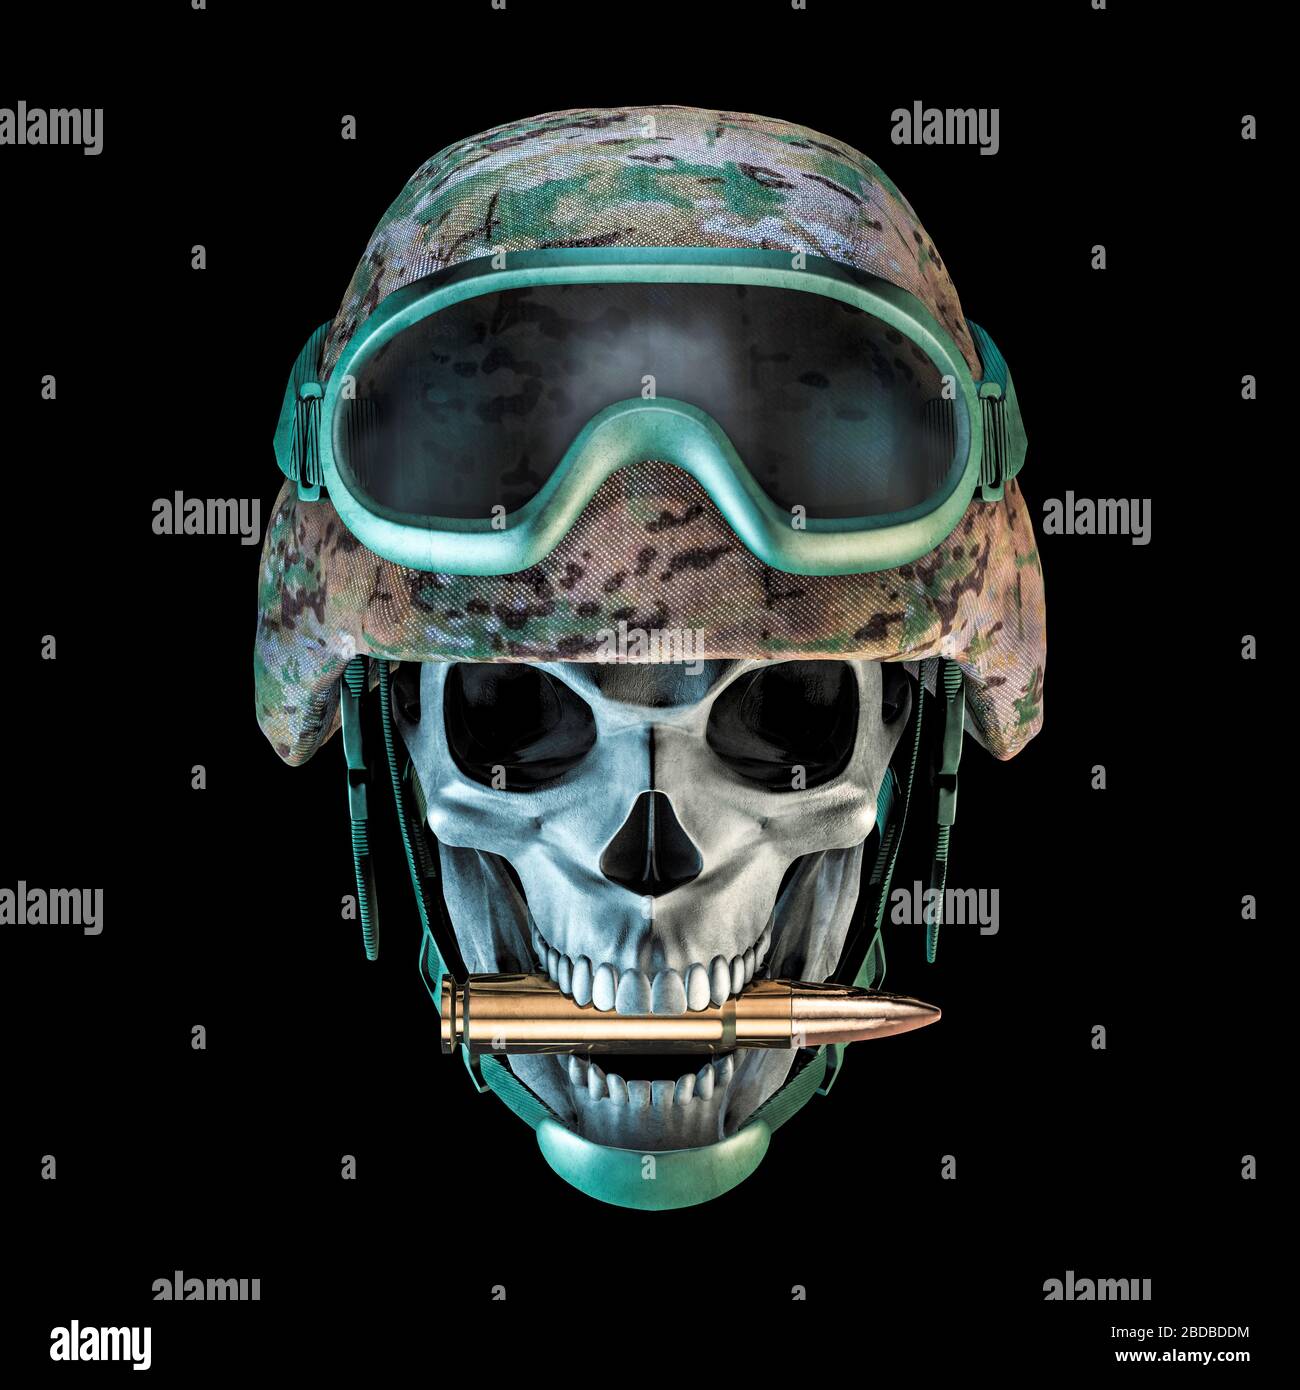 Bite the bullet army skull / 3D illustration of grungy military soldier skull wearing helmet and goggles biting rifle bullet Stock Photo